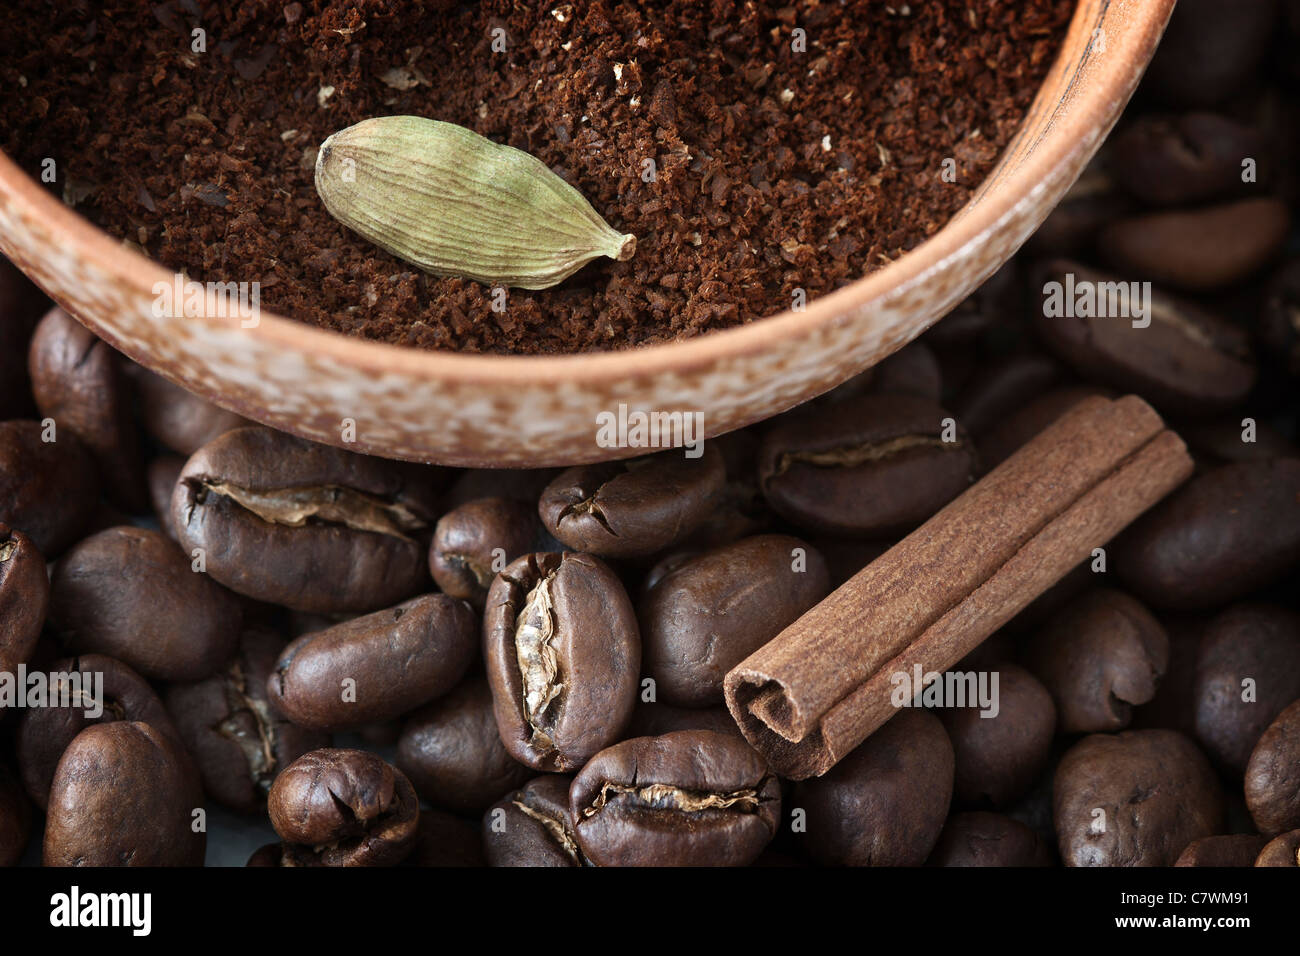 Full frame image of coffee beans and powdered coffee with cinnamon and cardamom, the ingredients for Indian coffee. Stock Photo